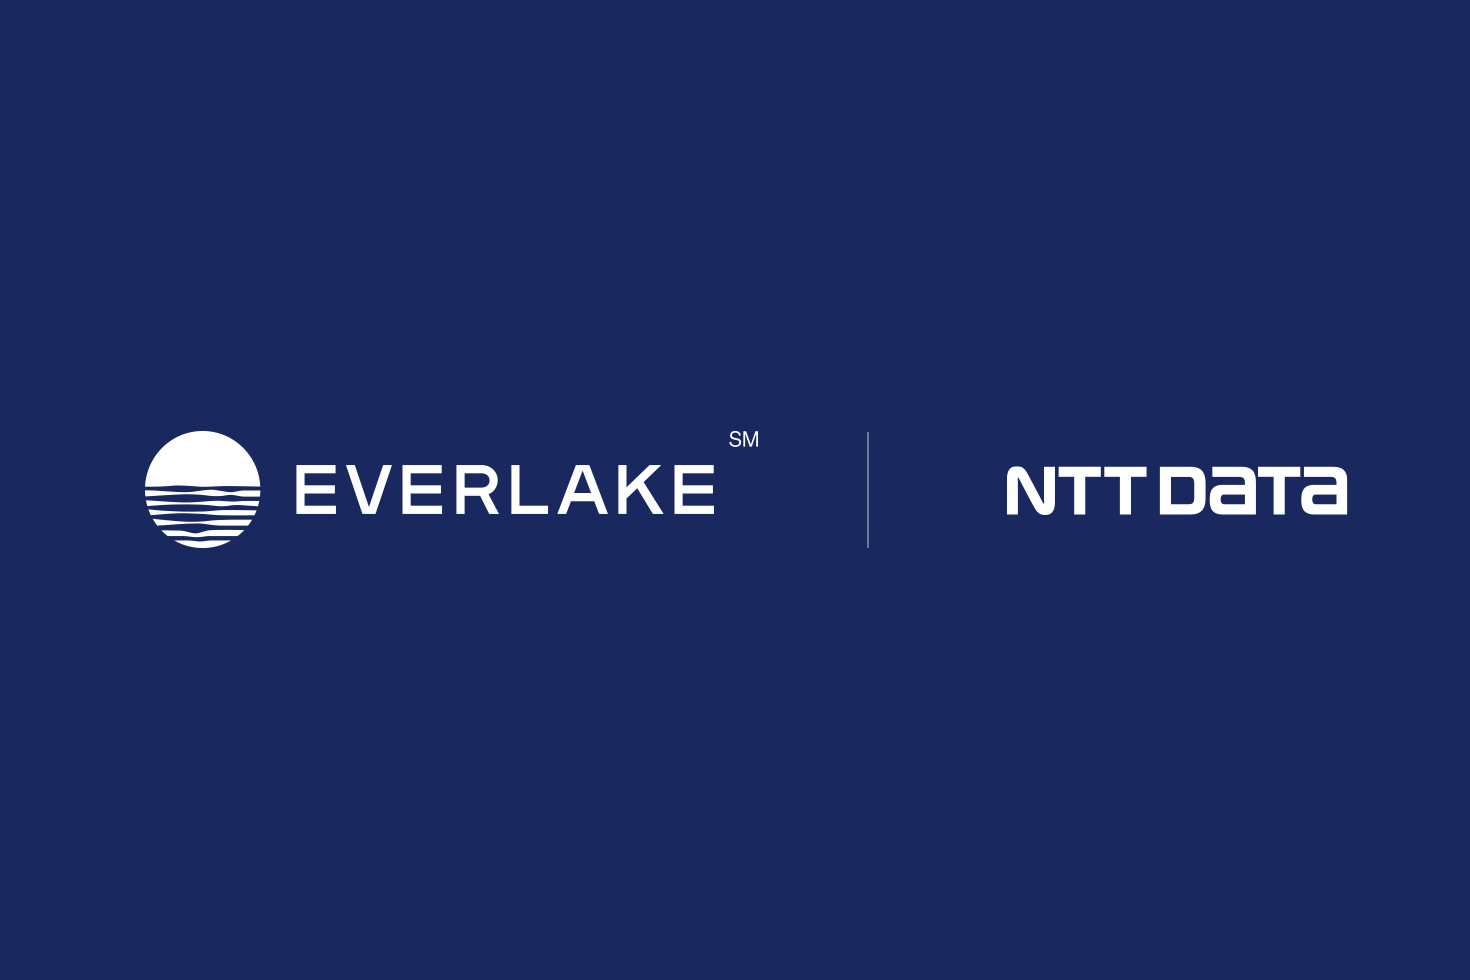 An image of the Everlake logo and wordmark and the wordmark of NTT Data. The logo and wordmarks are both in white and the background color is dark blue. The Everlake logo is round with ripples resembling water.